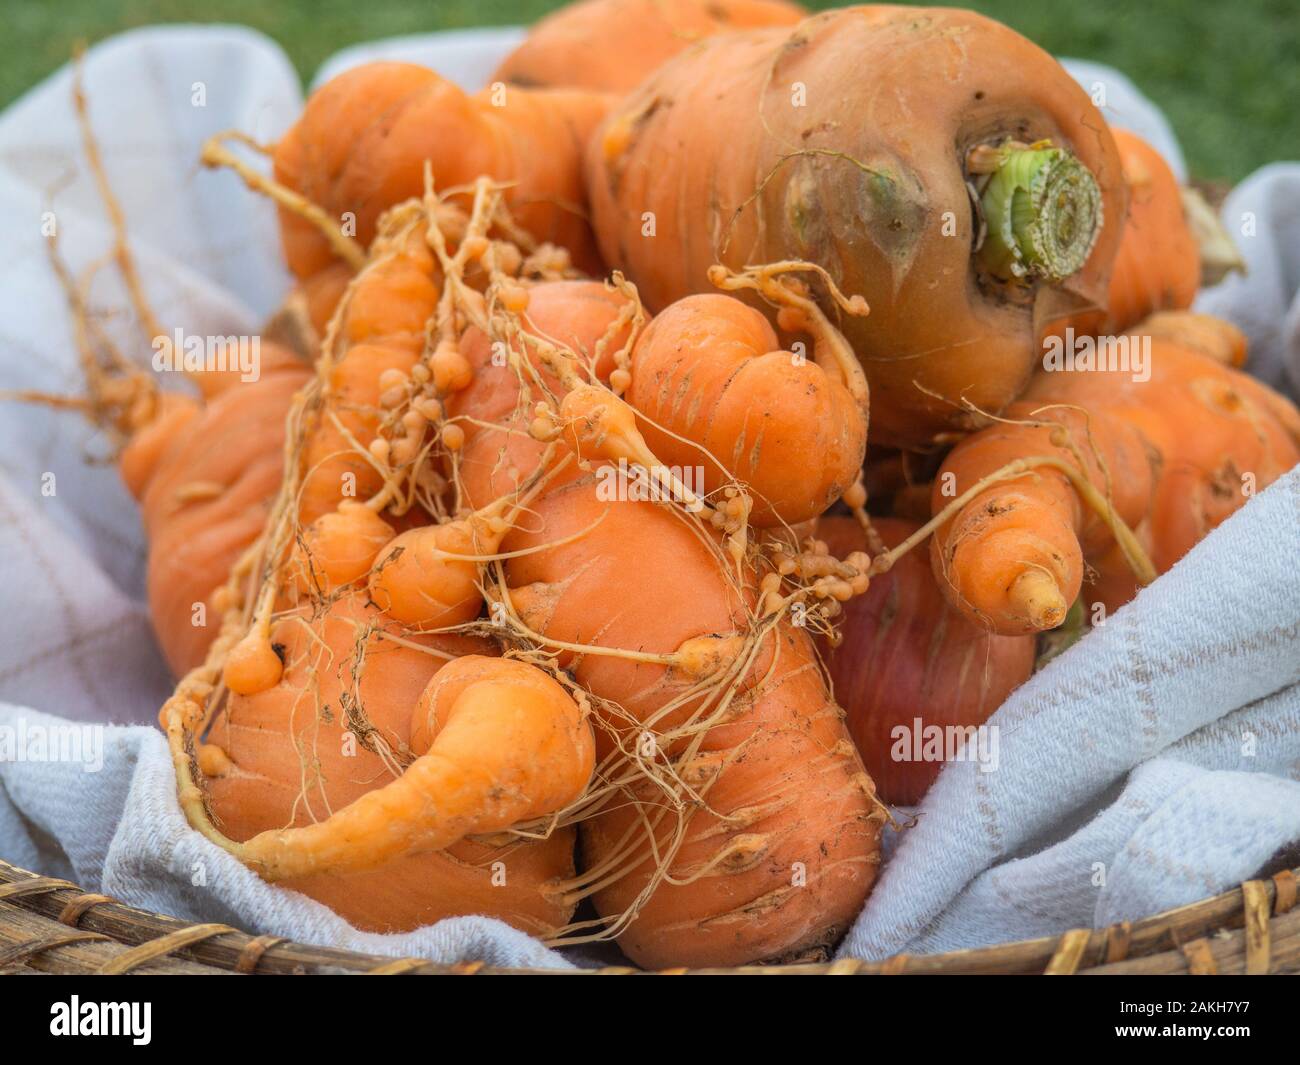 deformed carrots in a basket Stock Photo